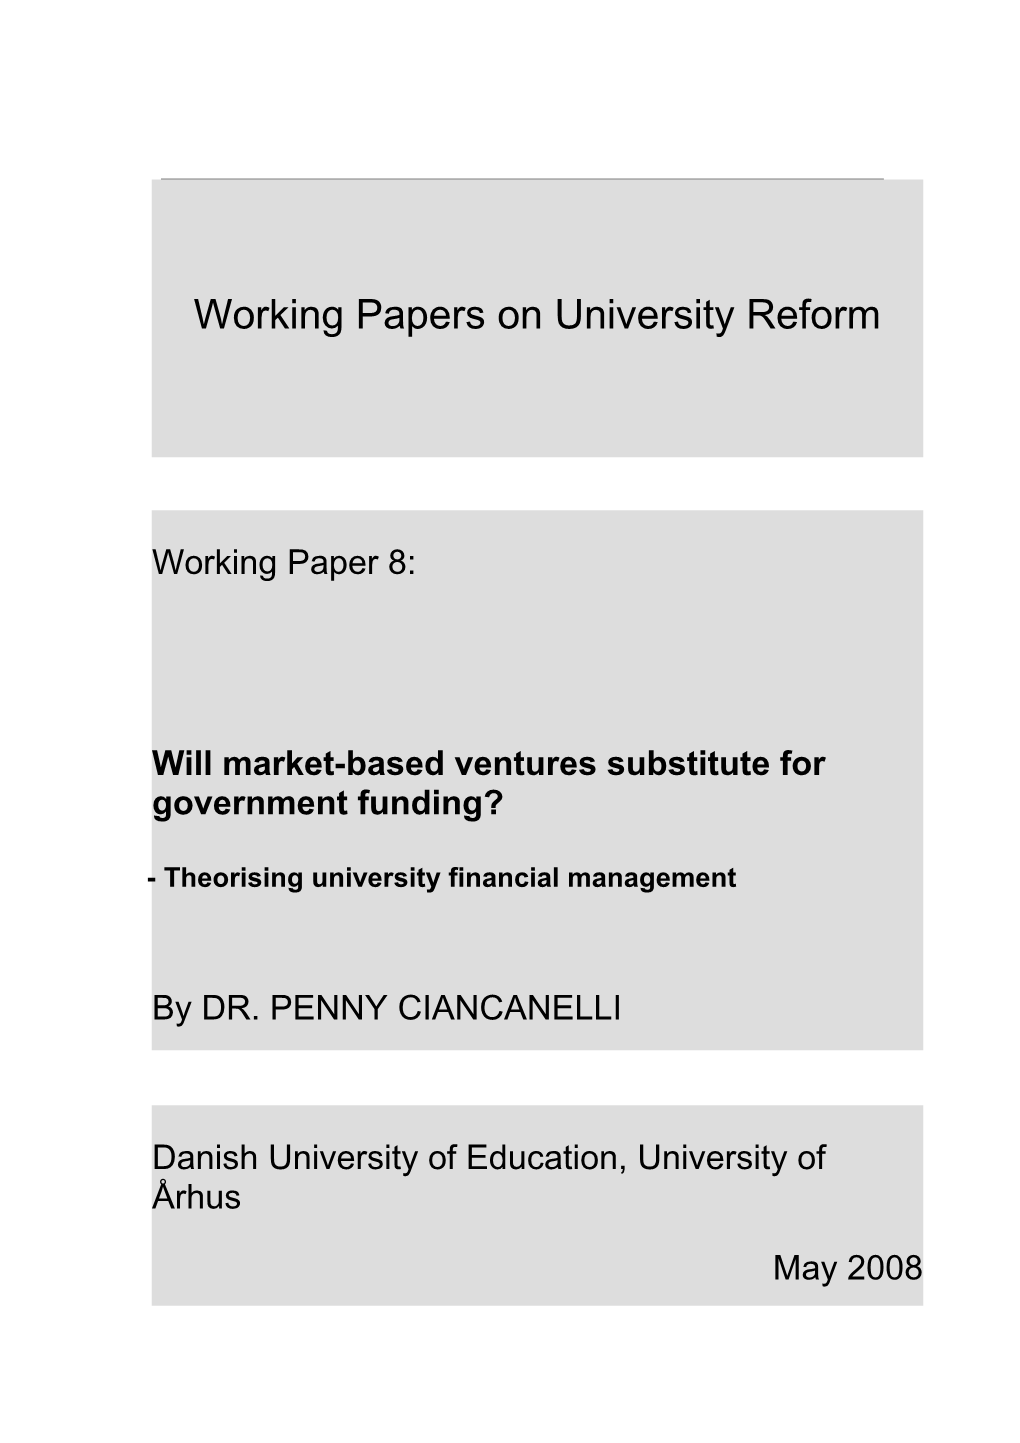 Working Papers on University Reform